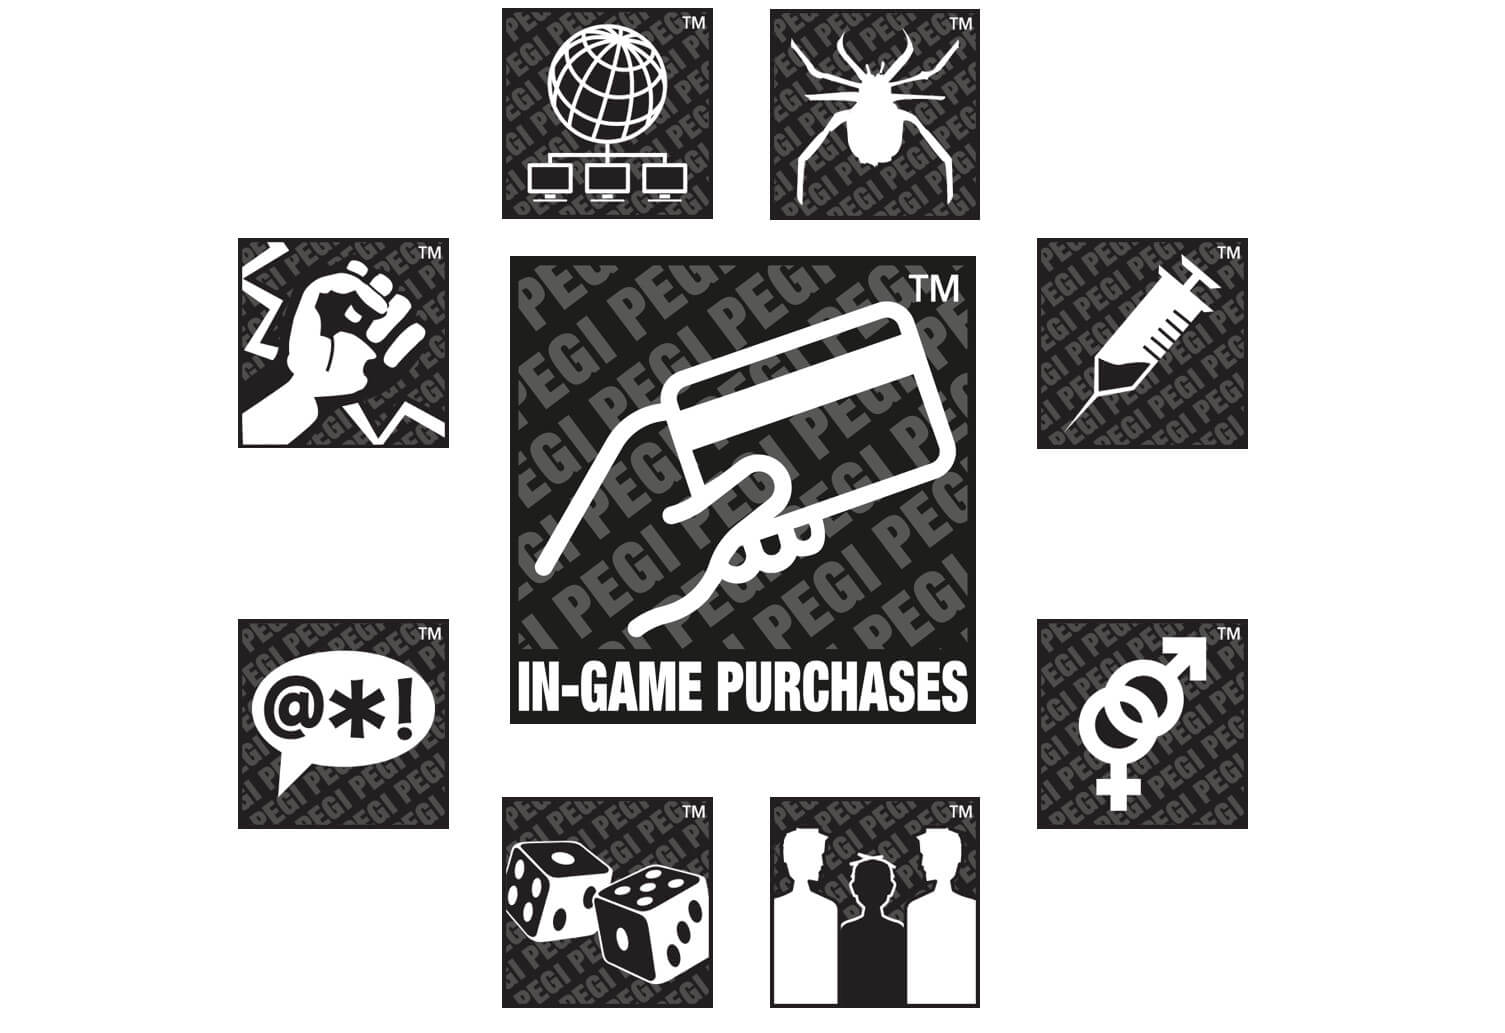 PEGI introduces new package labeling for in-game purchases